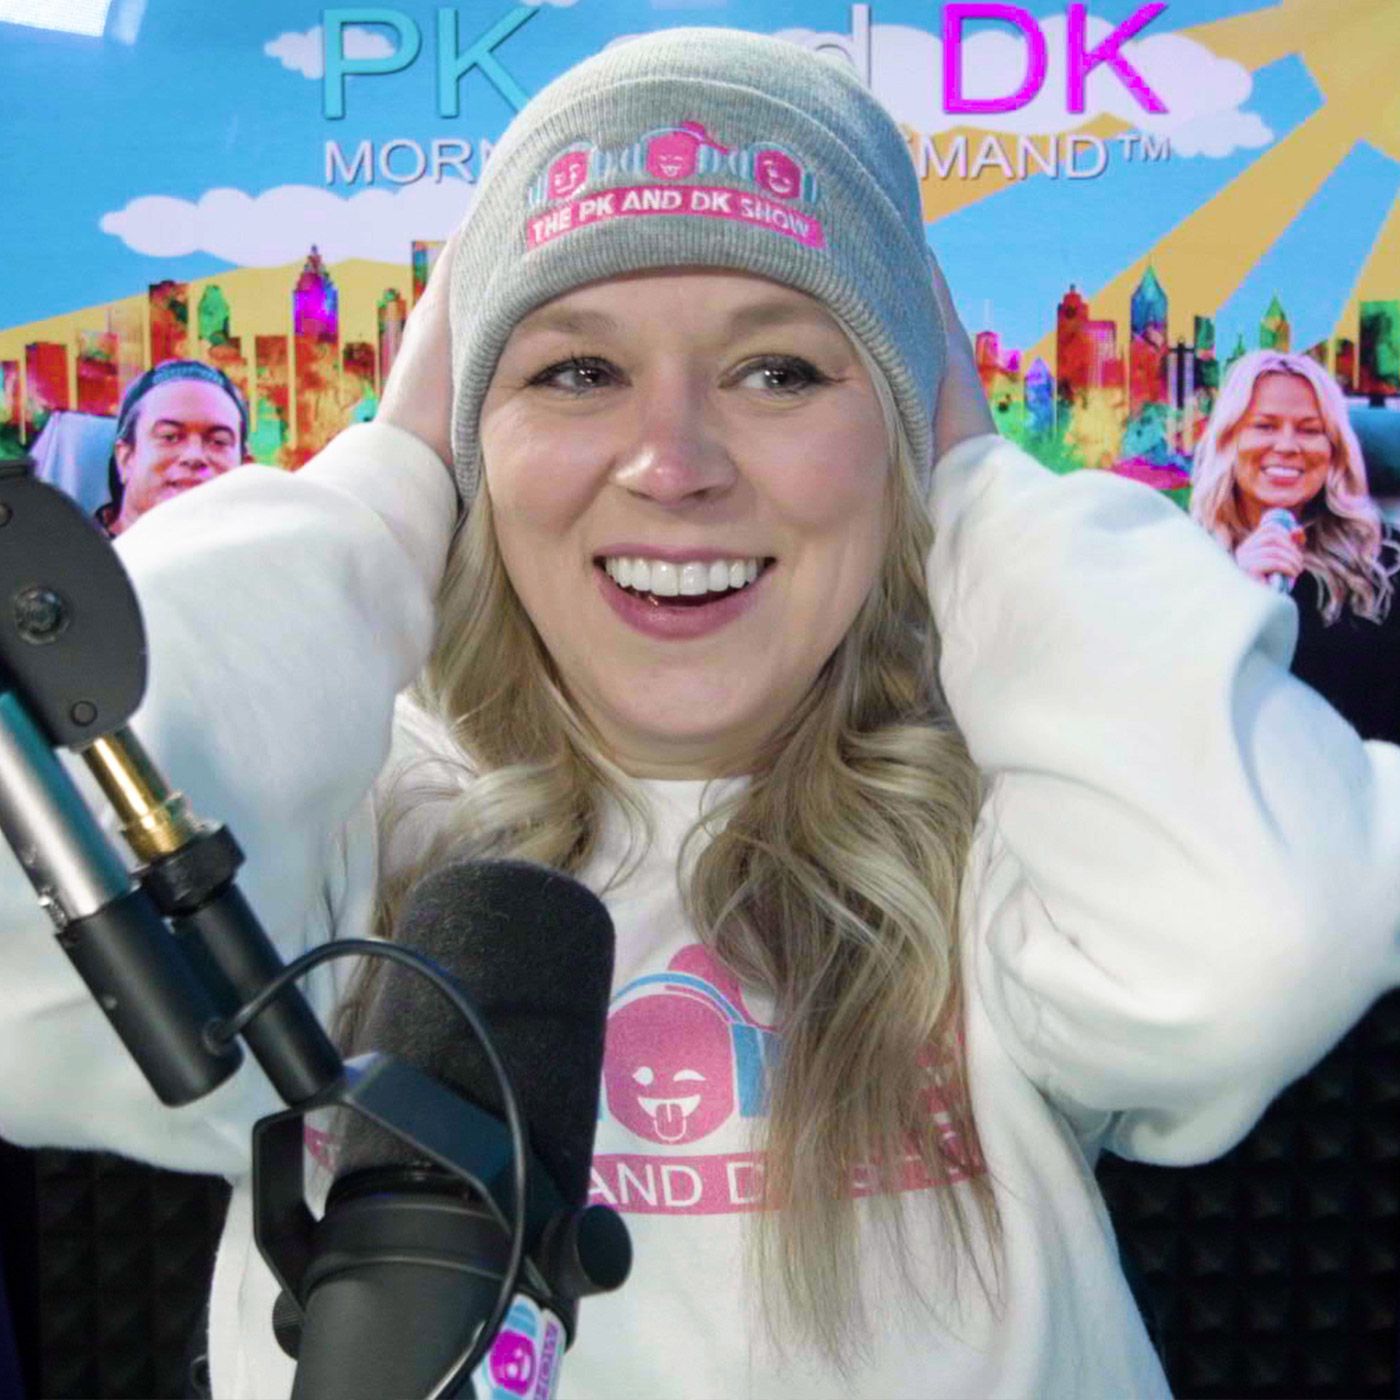 Full Show: DK's 'always be sticking' gift + a new idea for iHeart to steal